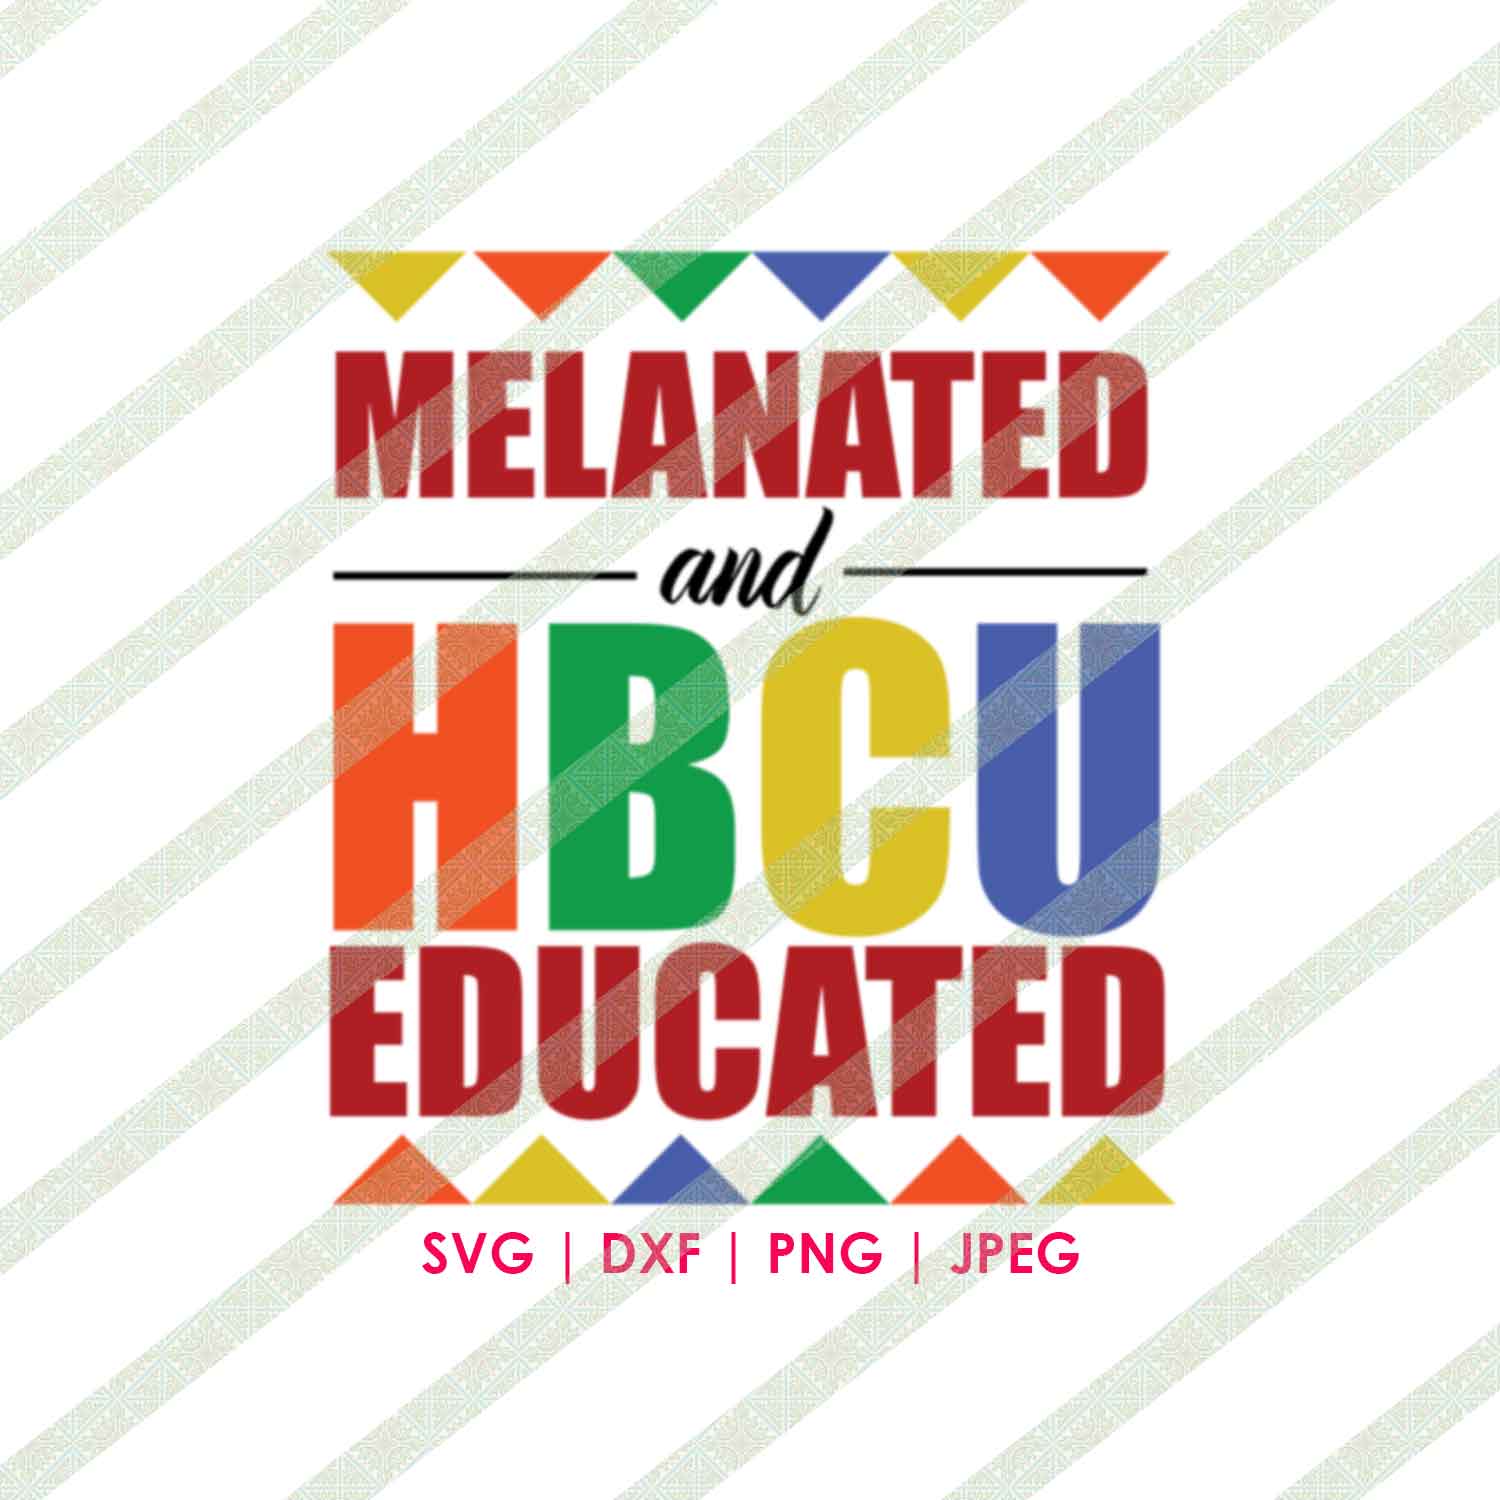 Melanated and HBCU Educated SVG